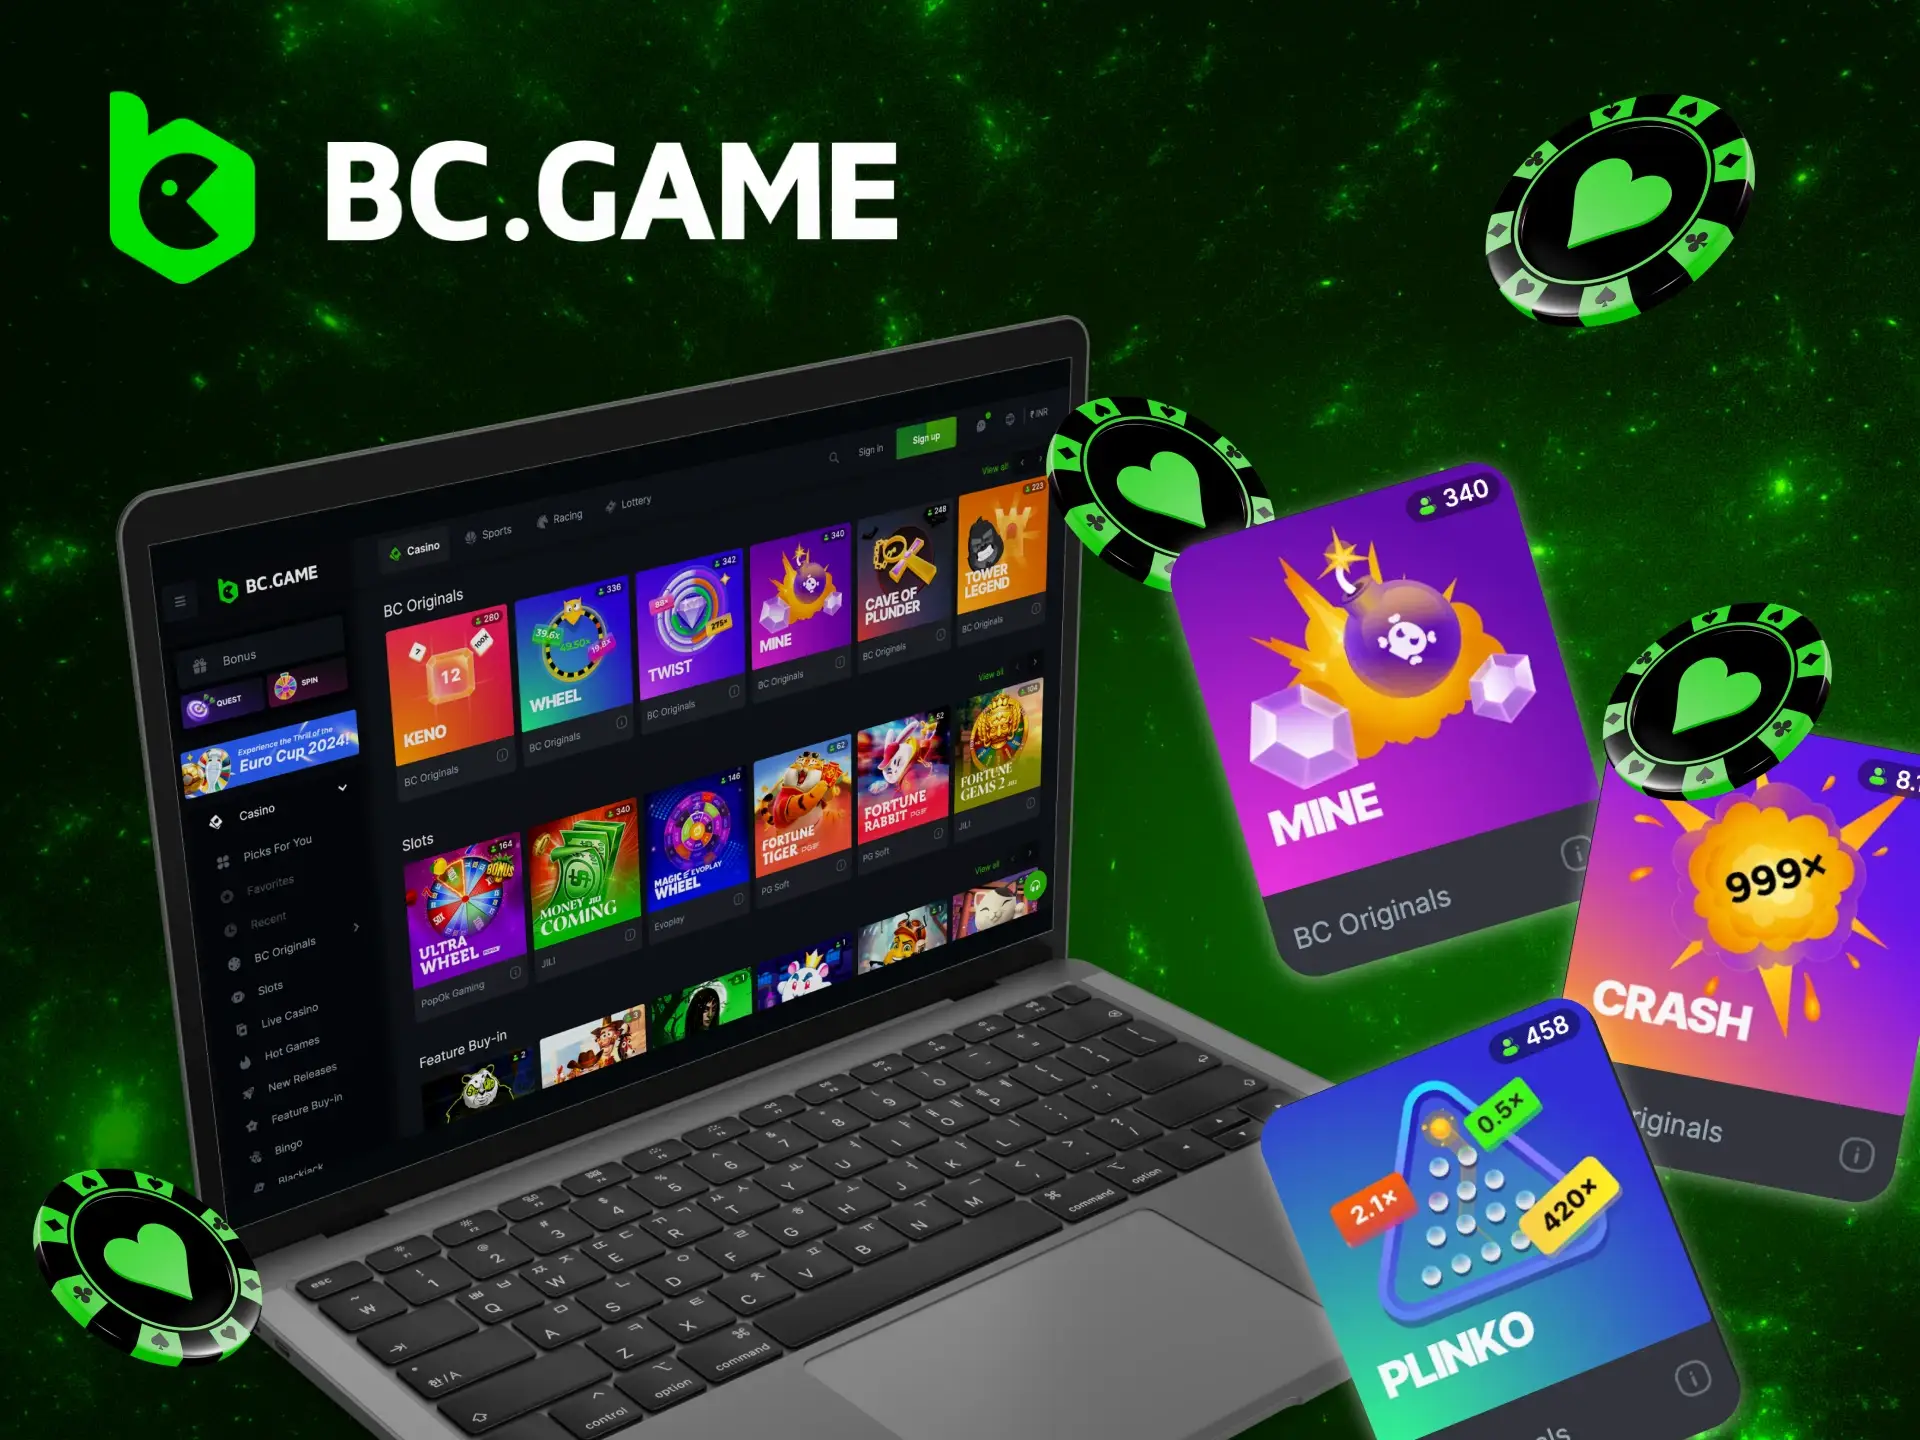 What popular games have been developed by the developers of the BC Game casino.